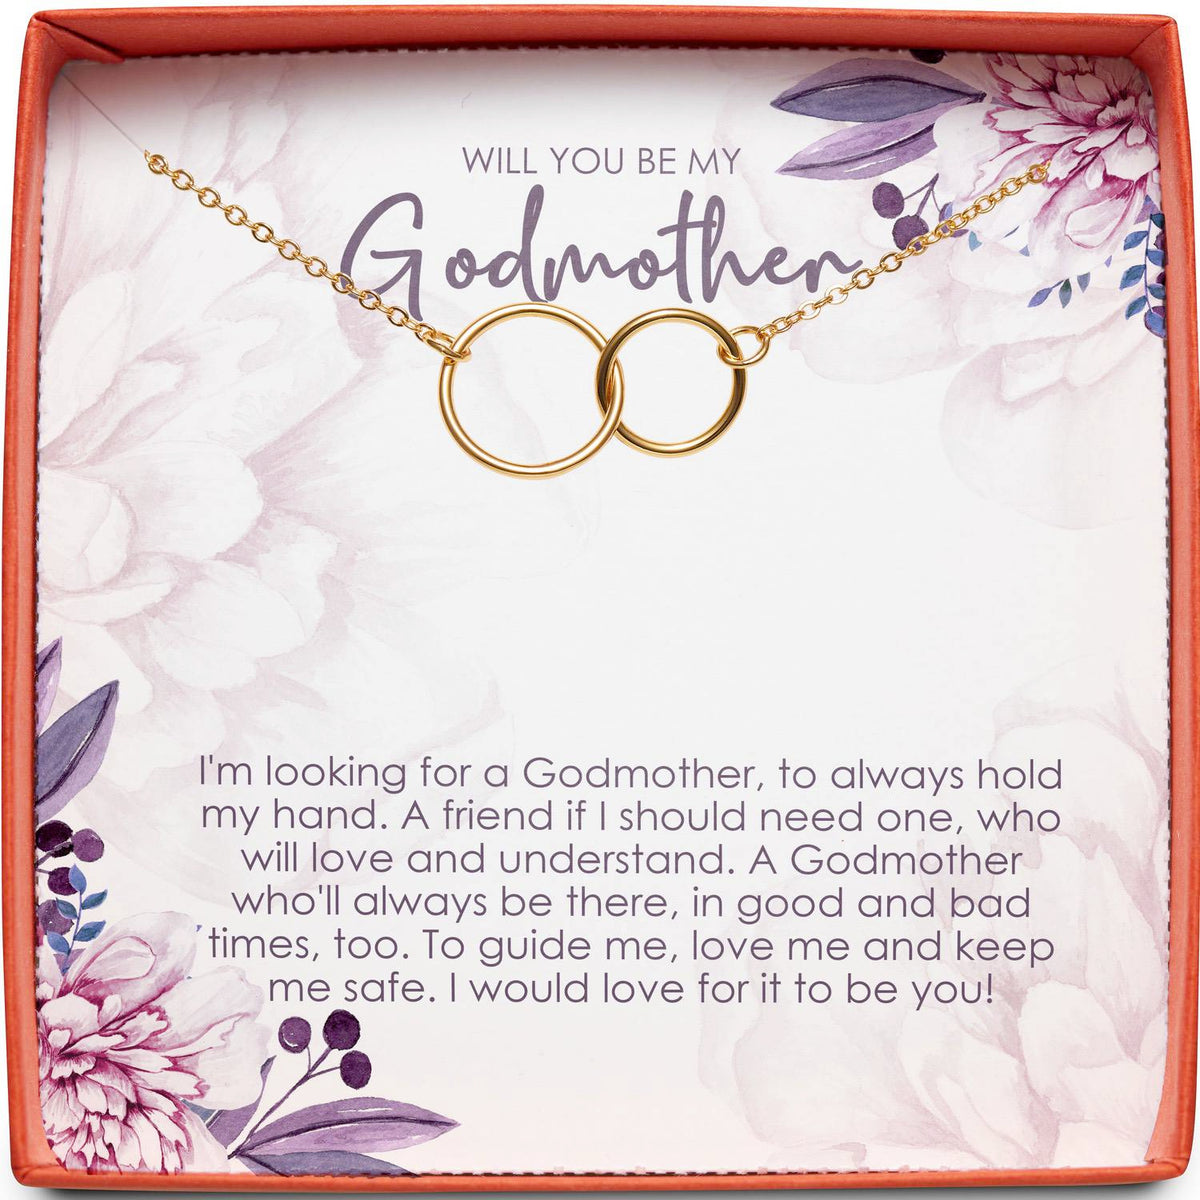 Will You Be My Godmother? | Guide Me, Love Me, Keep Me Safe | Interlocking Circles